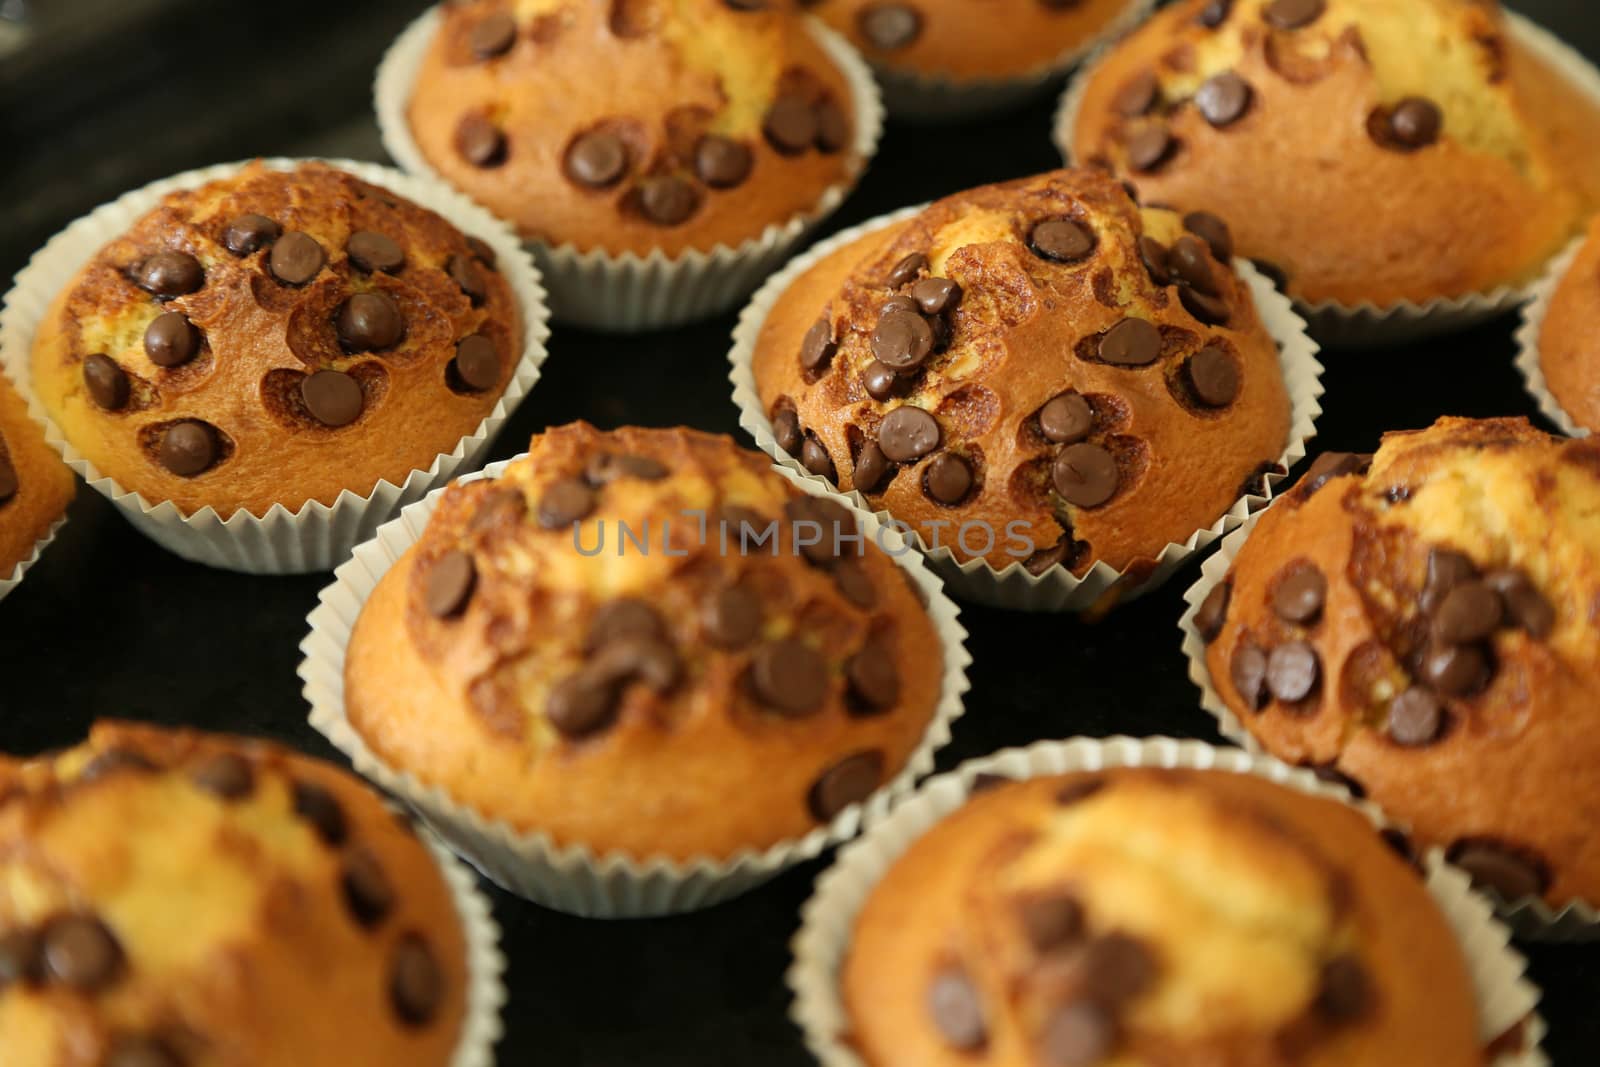 Muffins with chocolate chips on the baking tray just from the stove